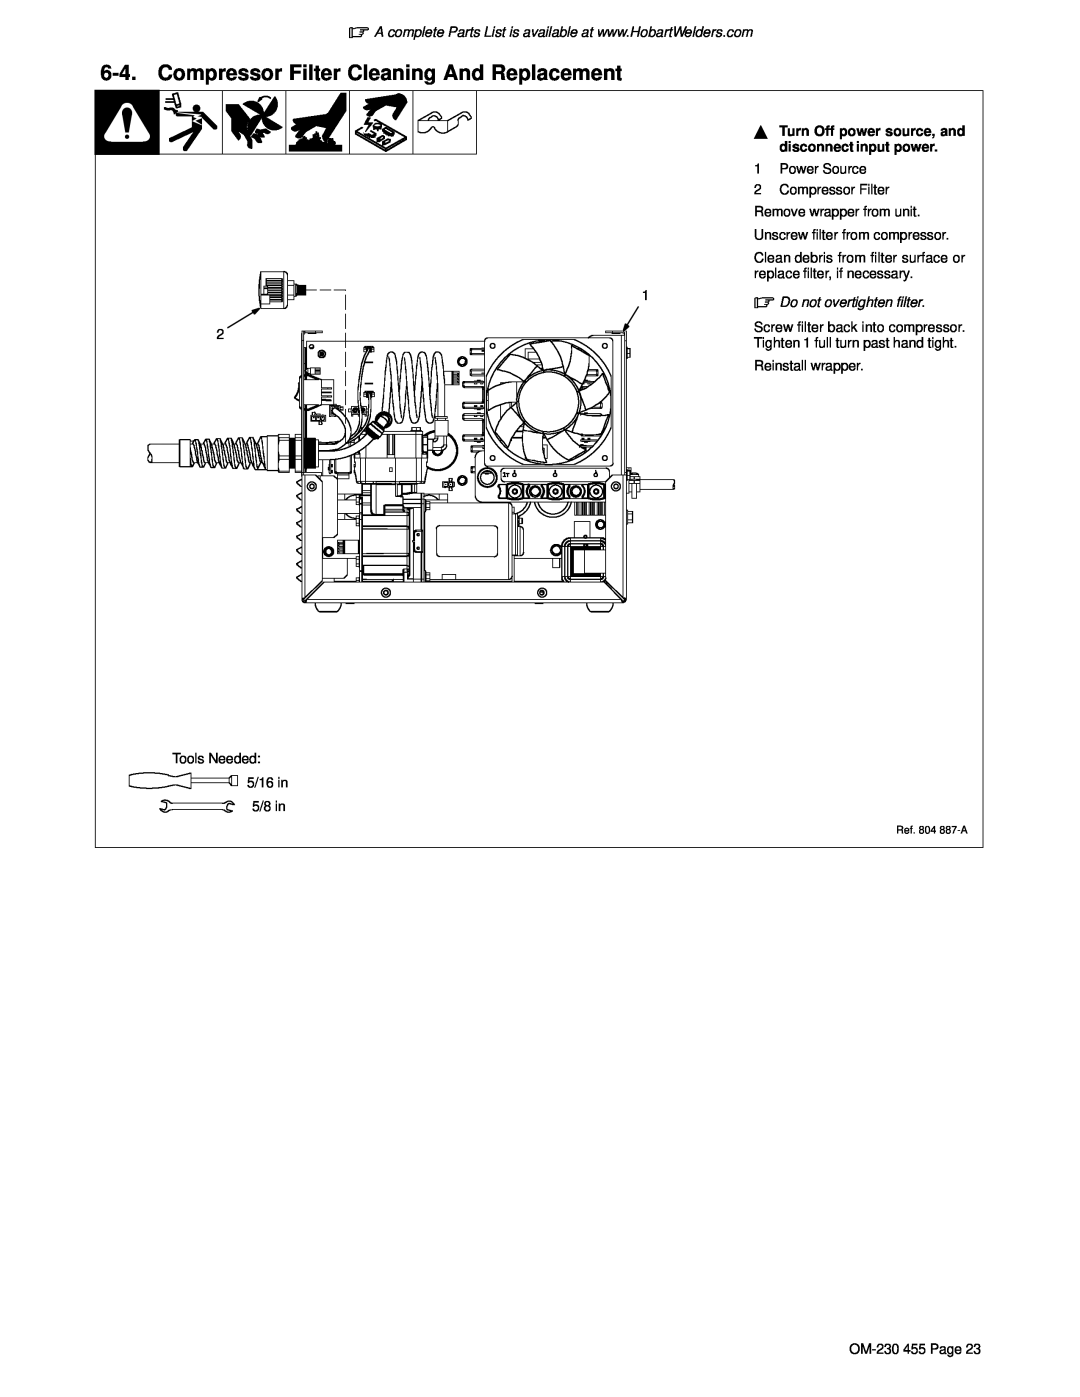 Hobart Welding Products OM-230 455D manual Compressor Filter Cleaning And Replacement, disconnect input power 